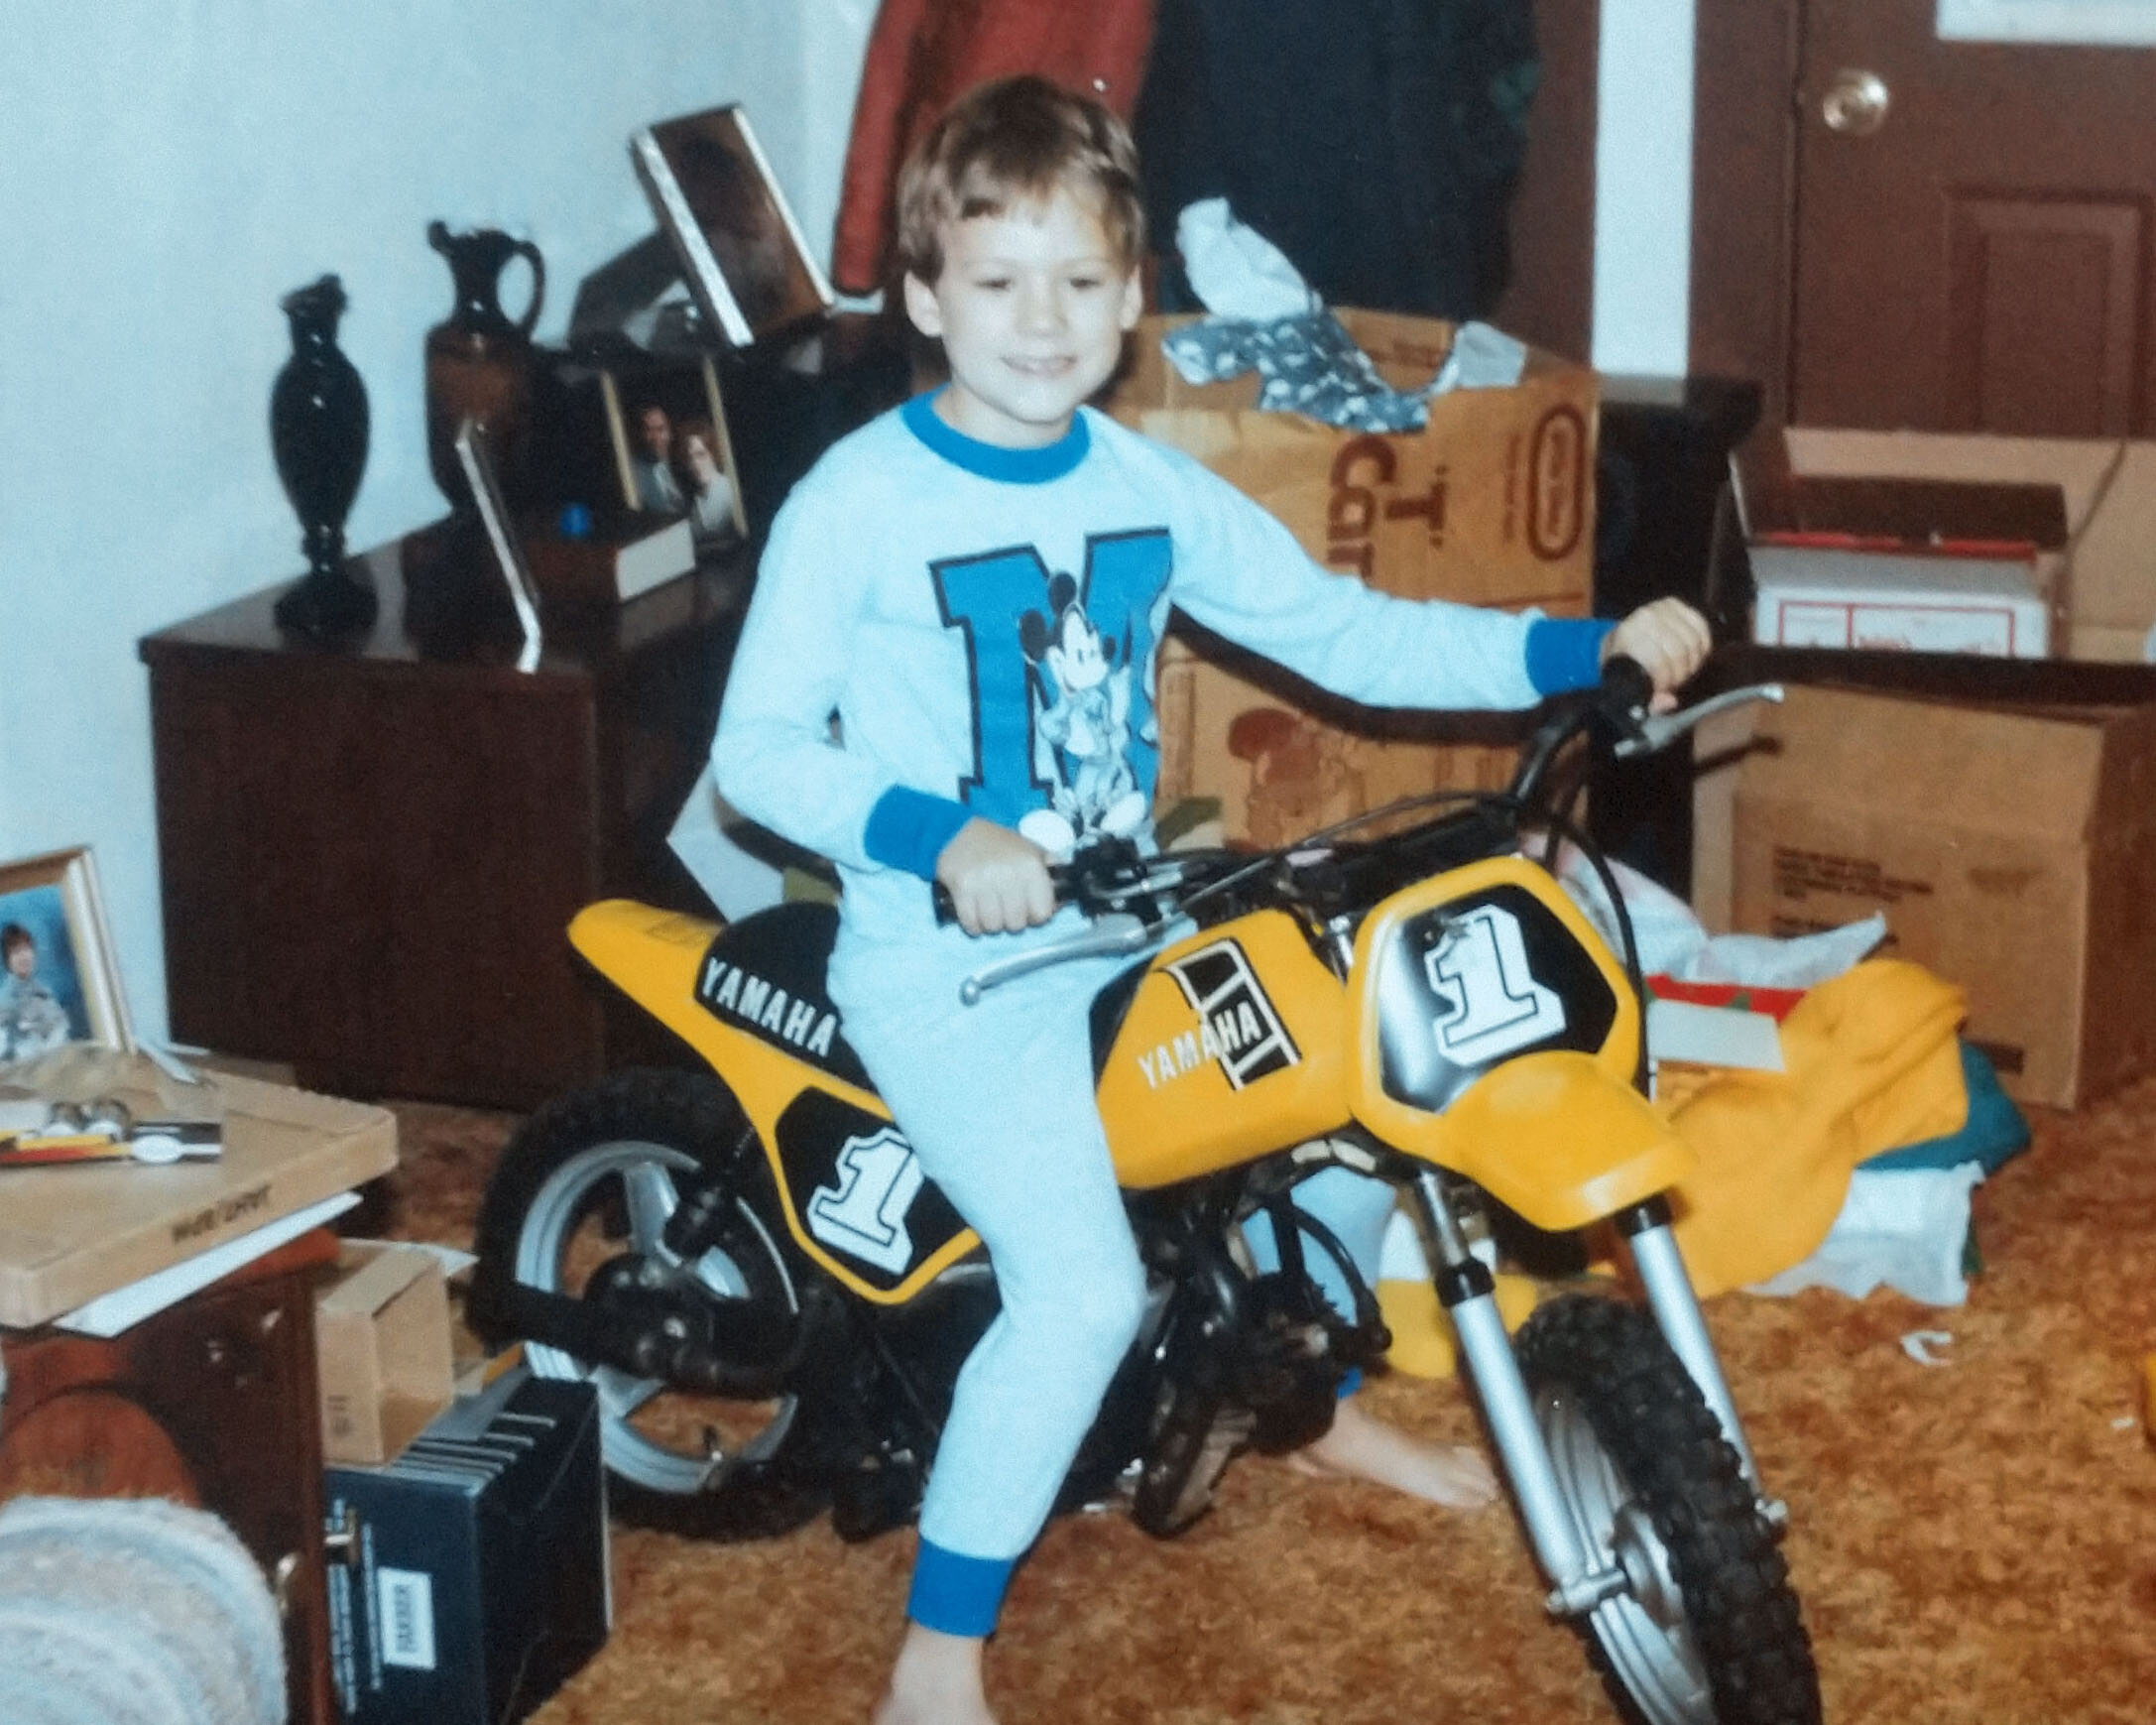 Young Boy on a Motorcycle